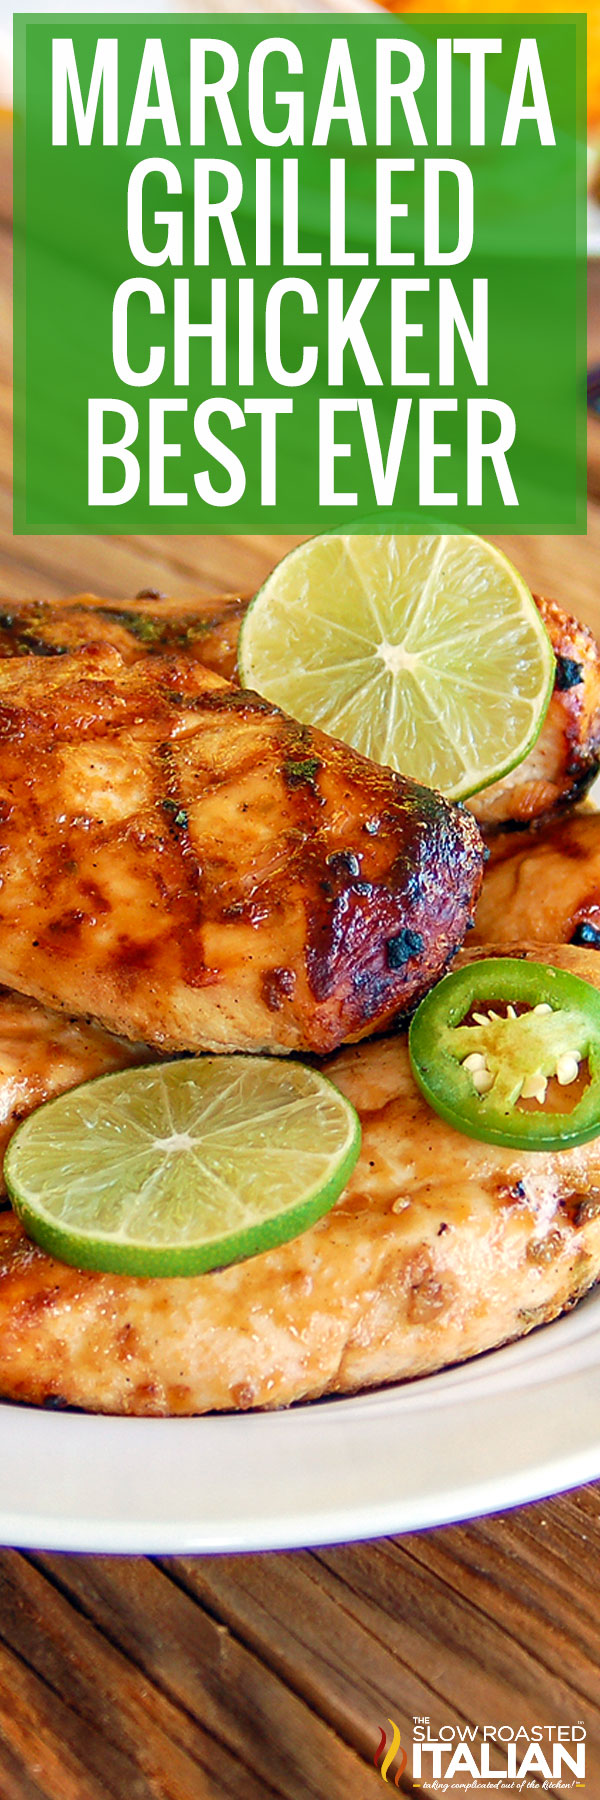 titled image (and shown): Margarita Grilled Chicken Best Ever